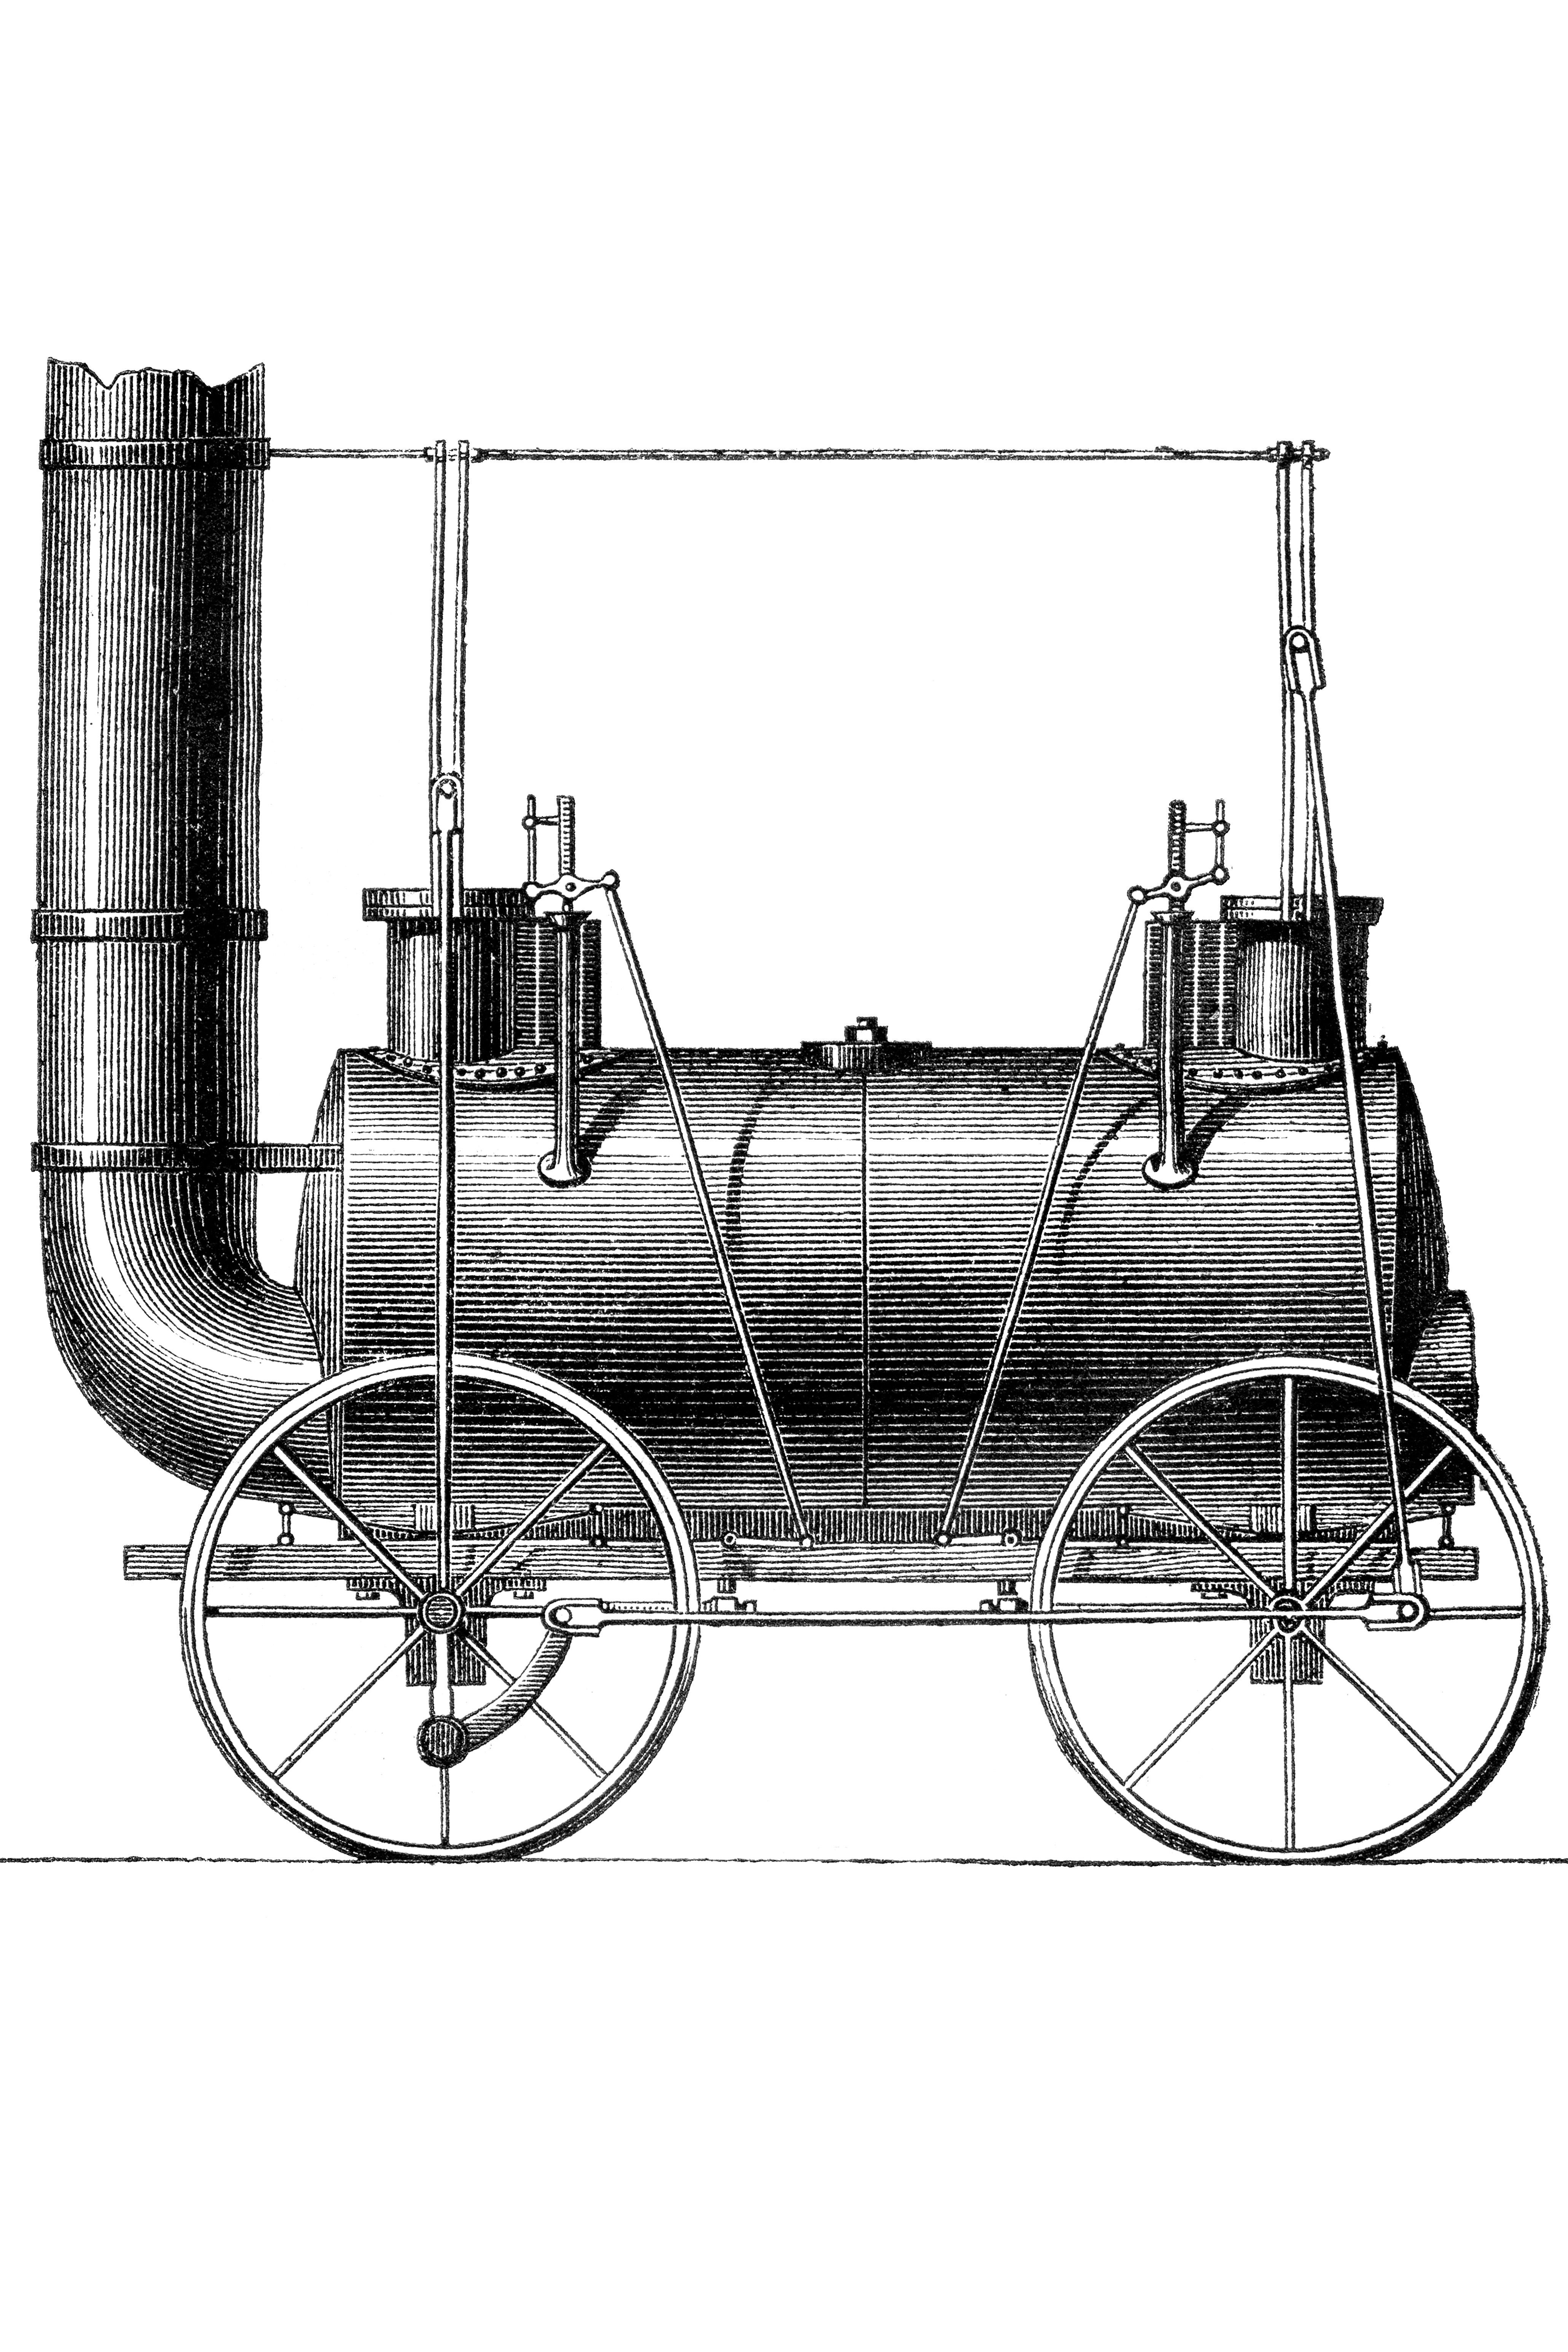 Steam engine, Definition, History, Impact, & Facts